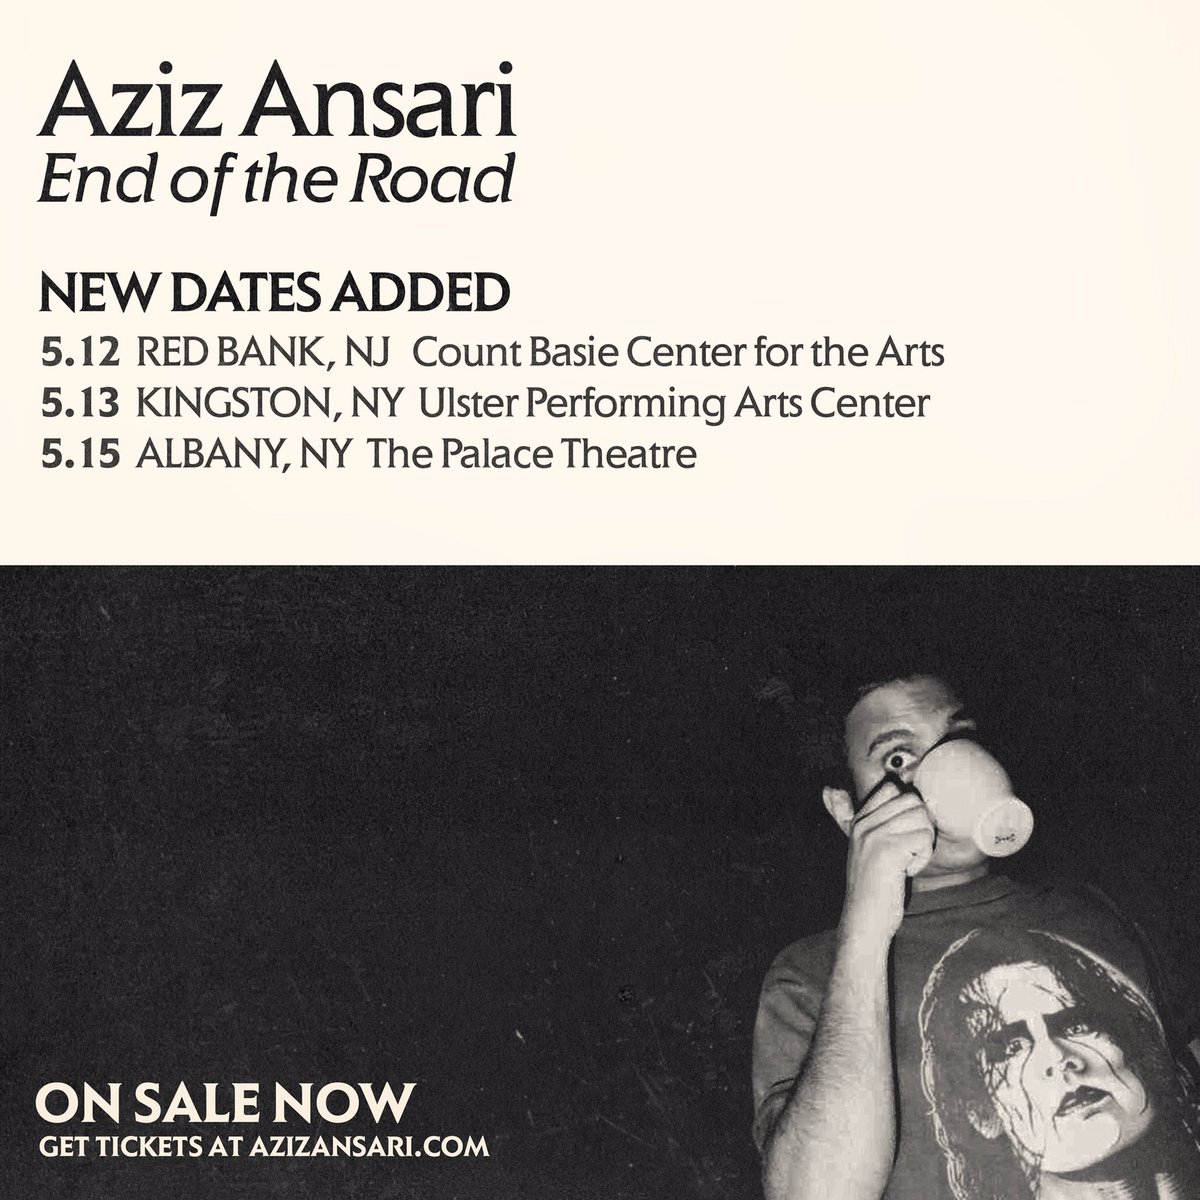 MORE DATES: Albany, Red Bank, Kingston - get tickets here:  